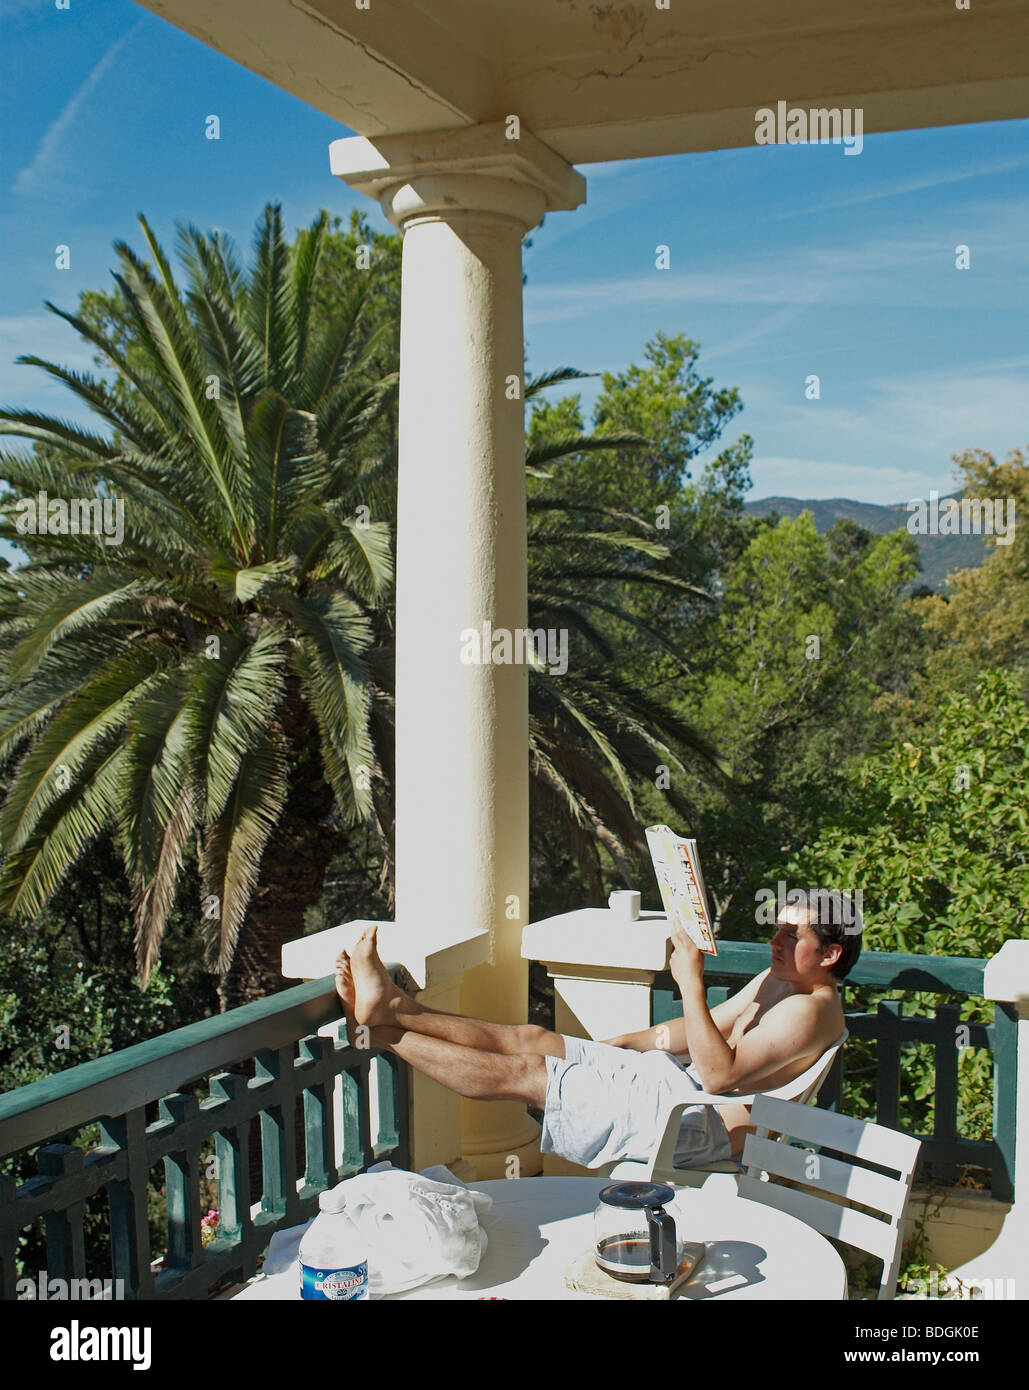 man sitting on chair reading a newspaper in the South of France on a balcony Stock Photo